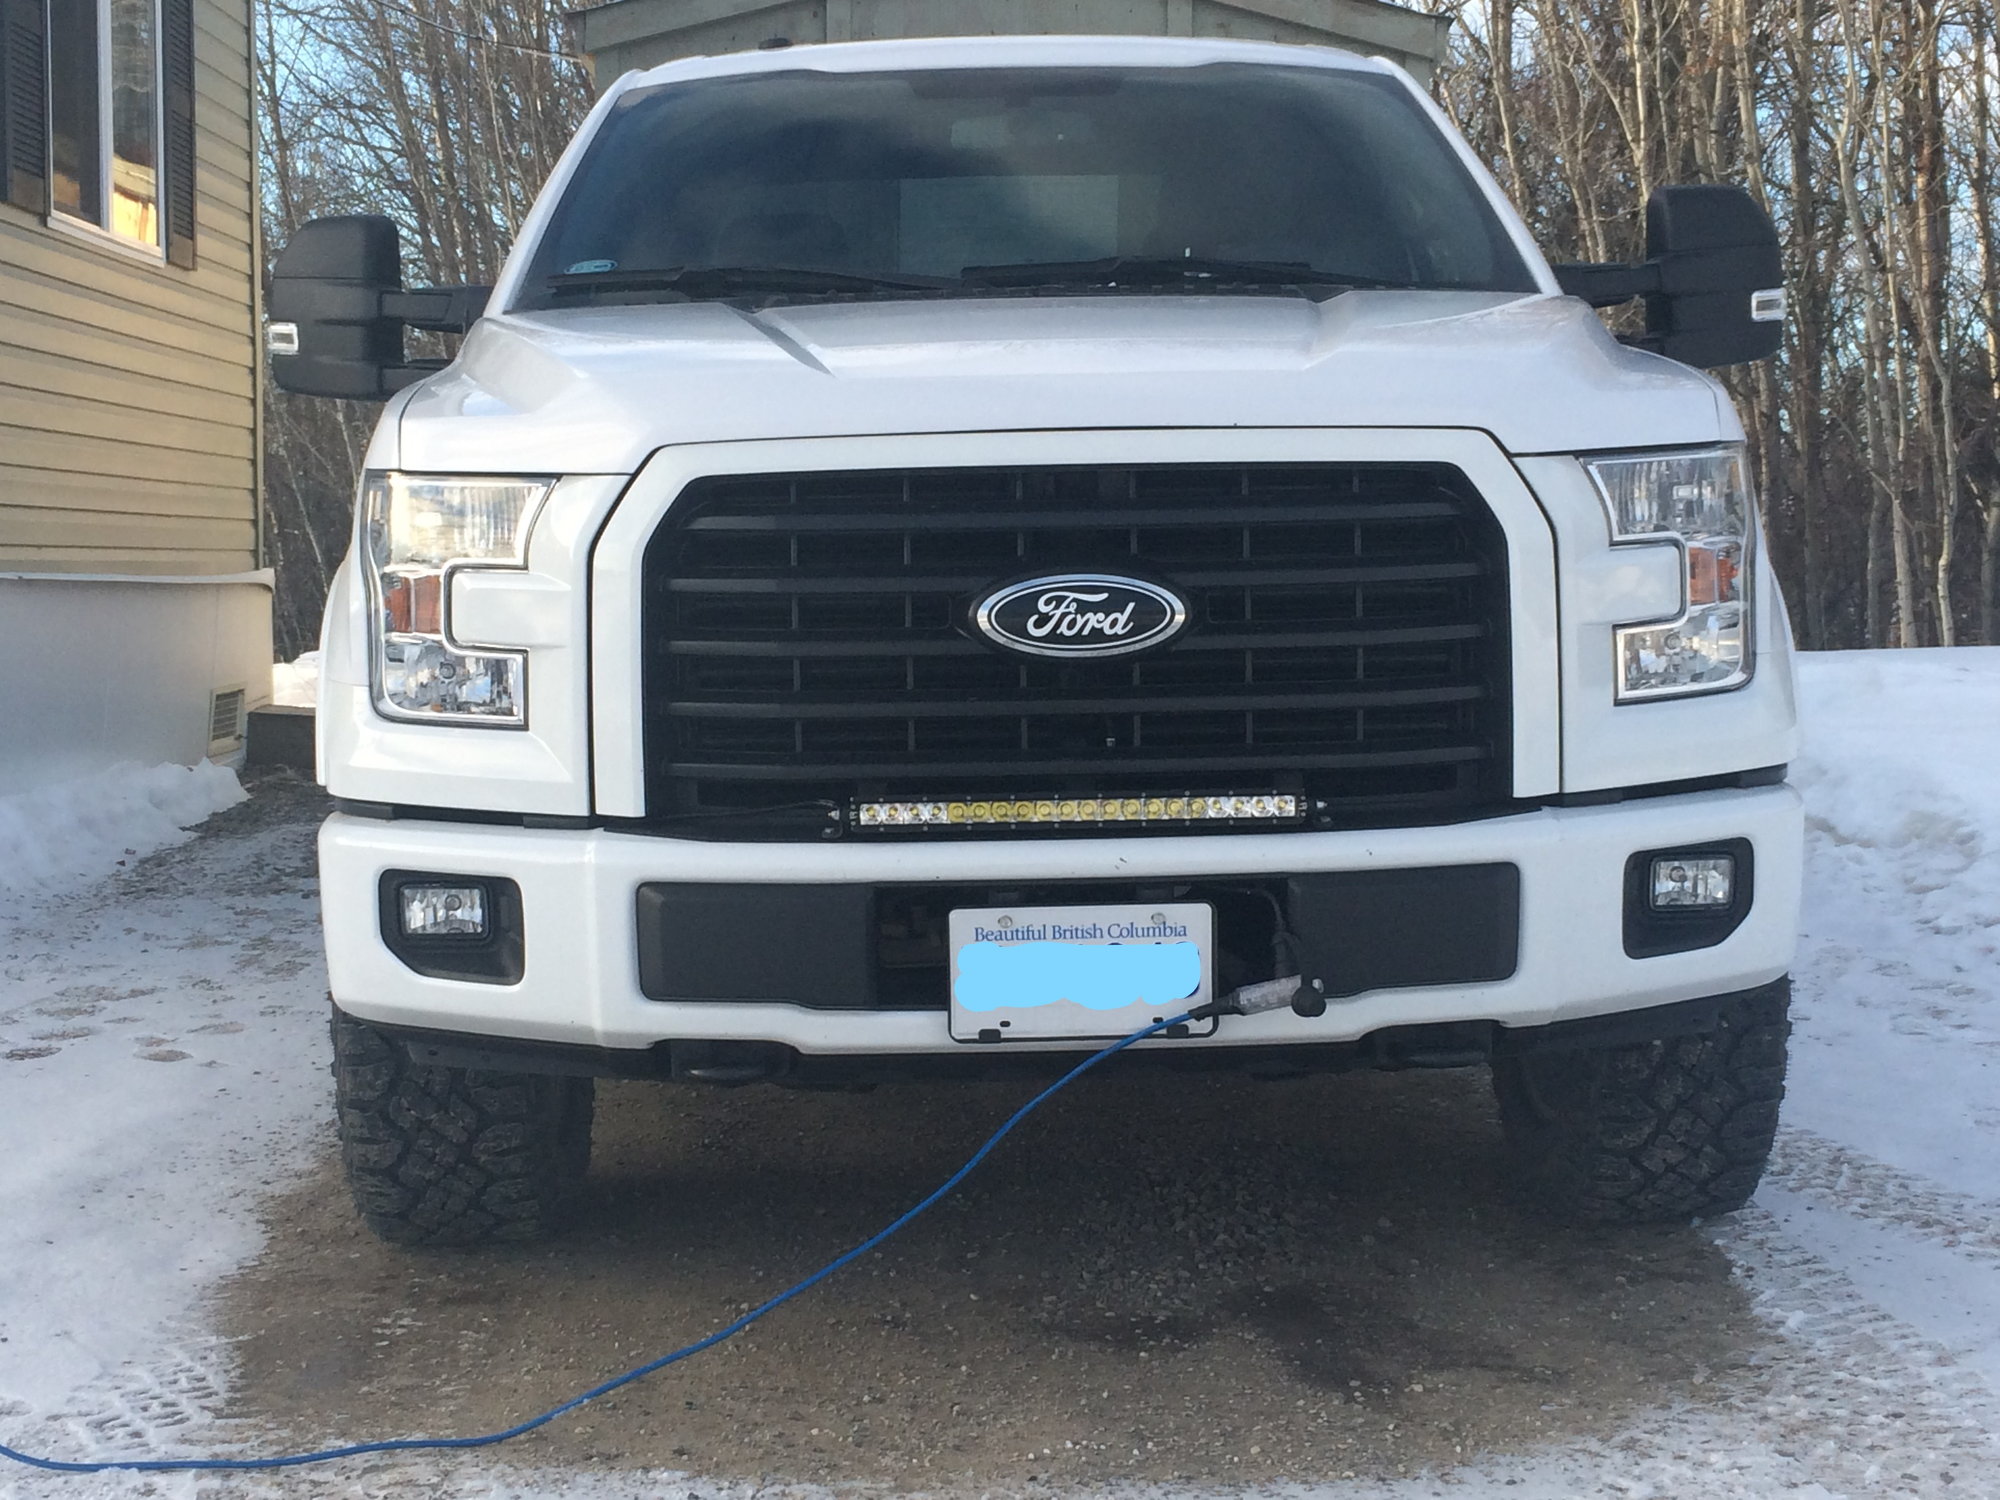 removing active grill shutters - Page 2 - Ford F150 Forum - Community